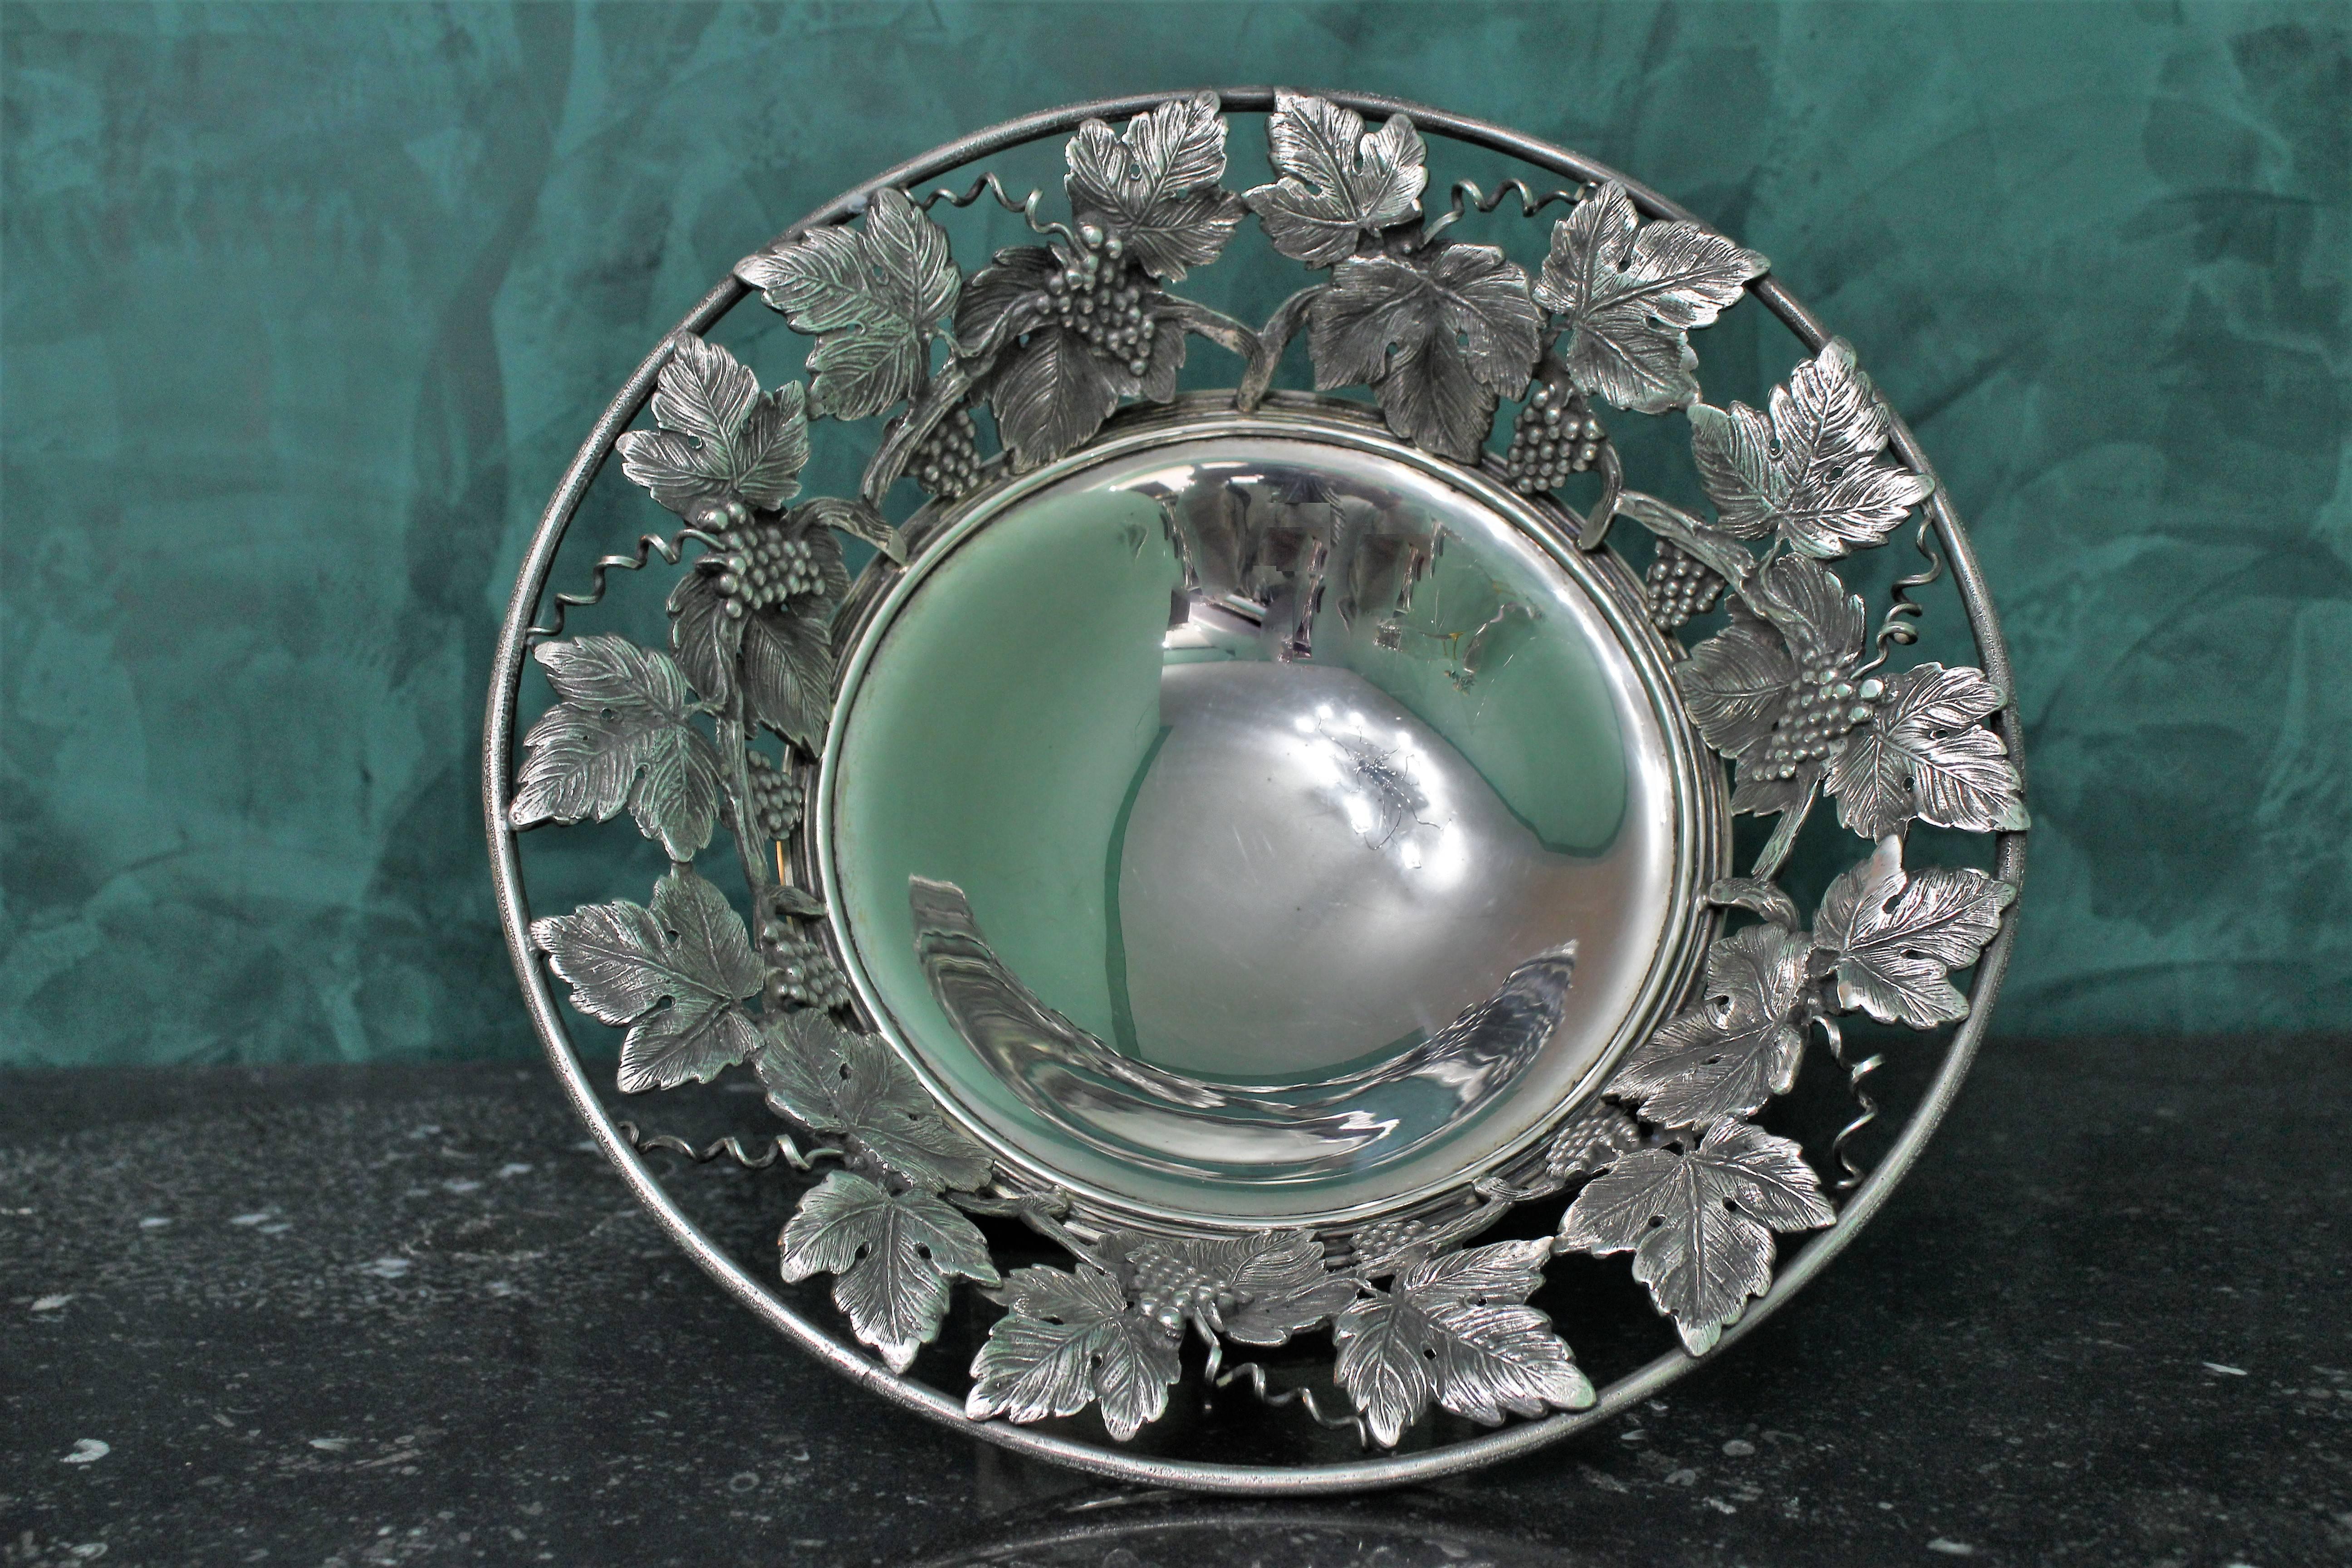 Silver fruit stand realized in Milan, Italy, between 1934 and 1944.
Handcrafted and engraved. Decorated with grape fruits and vines on the top part.
Dimensions: Diameter 27 cm, height 14 cm, weight 1270 gr.
 